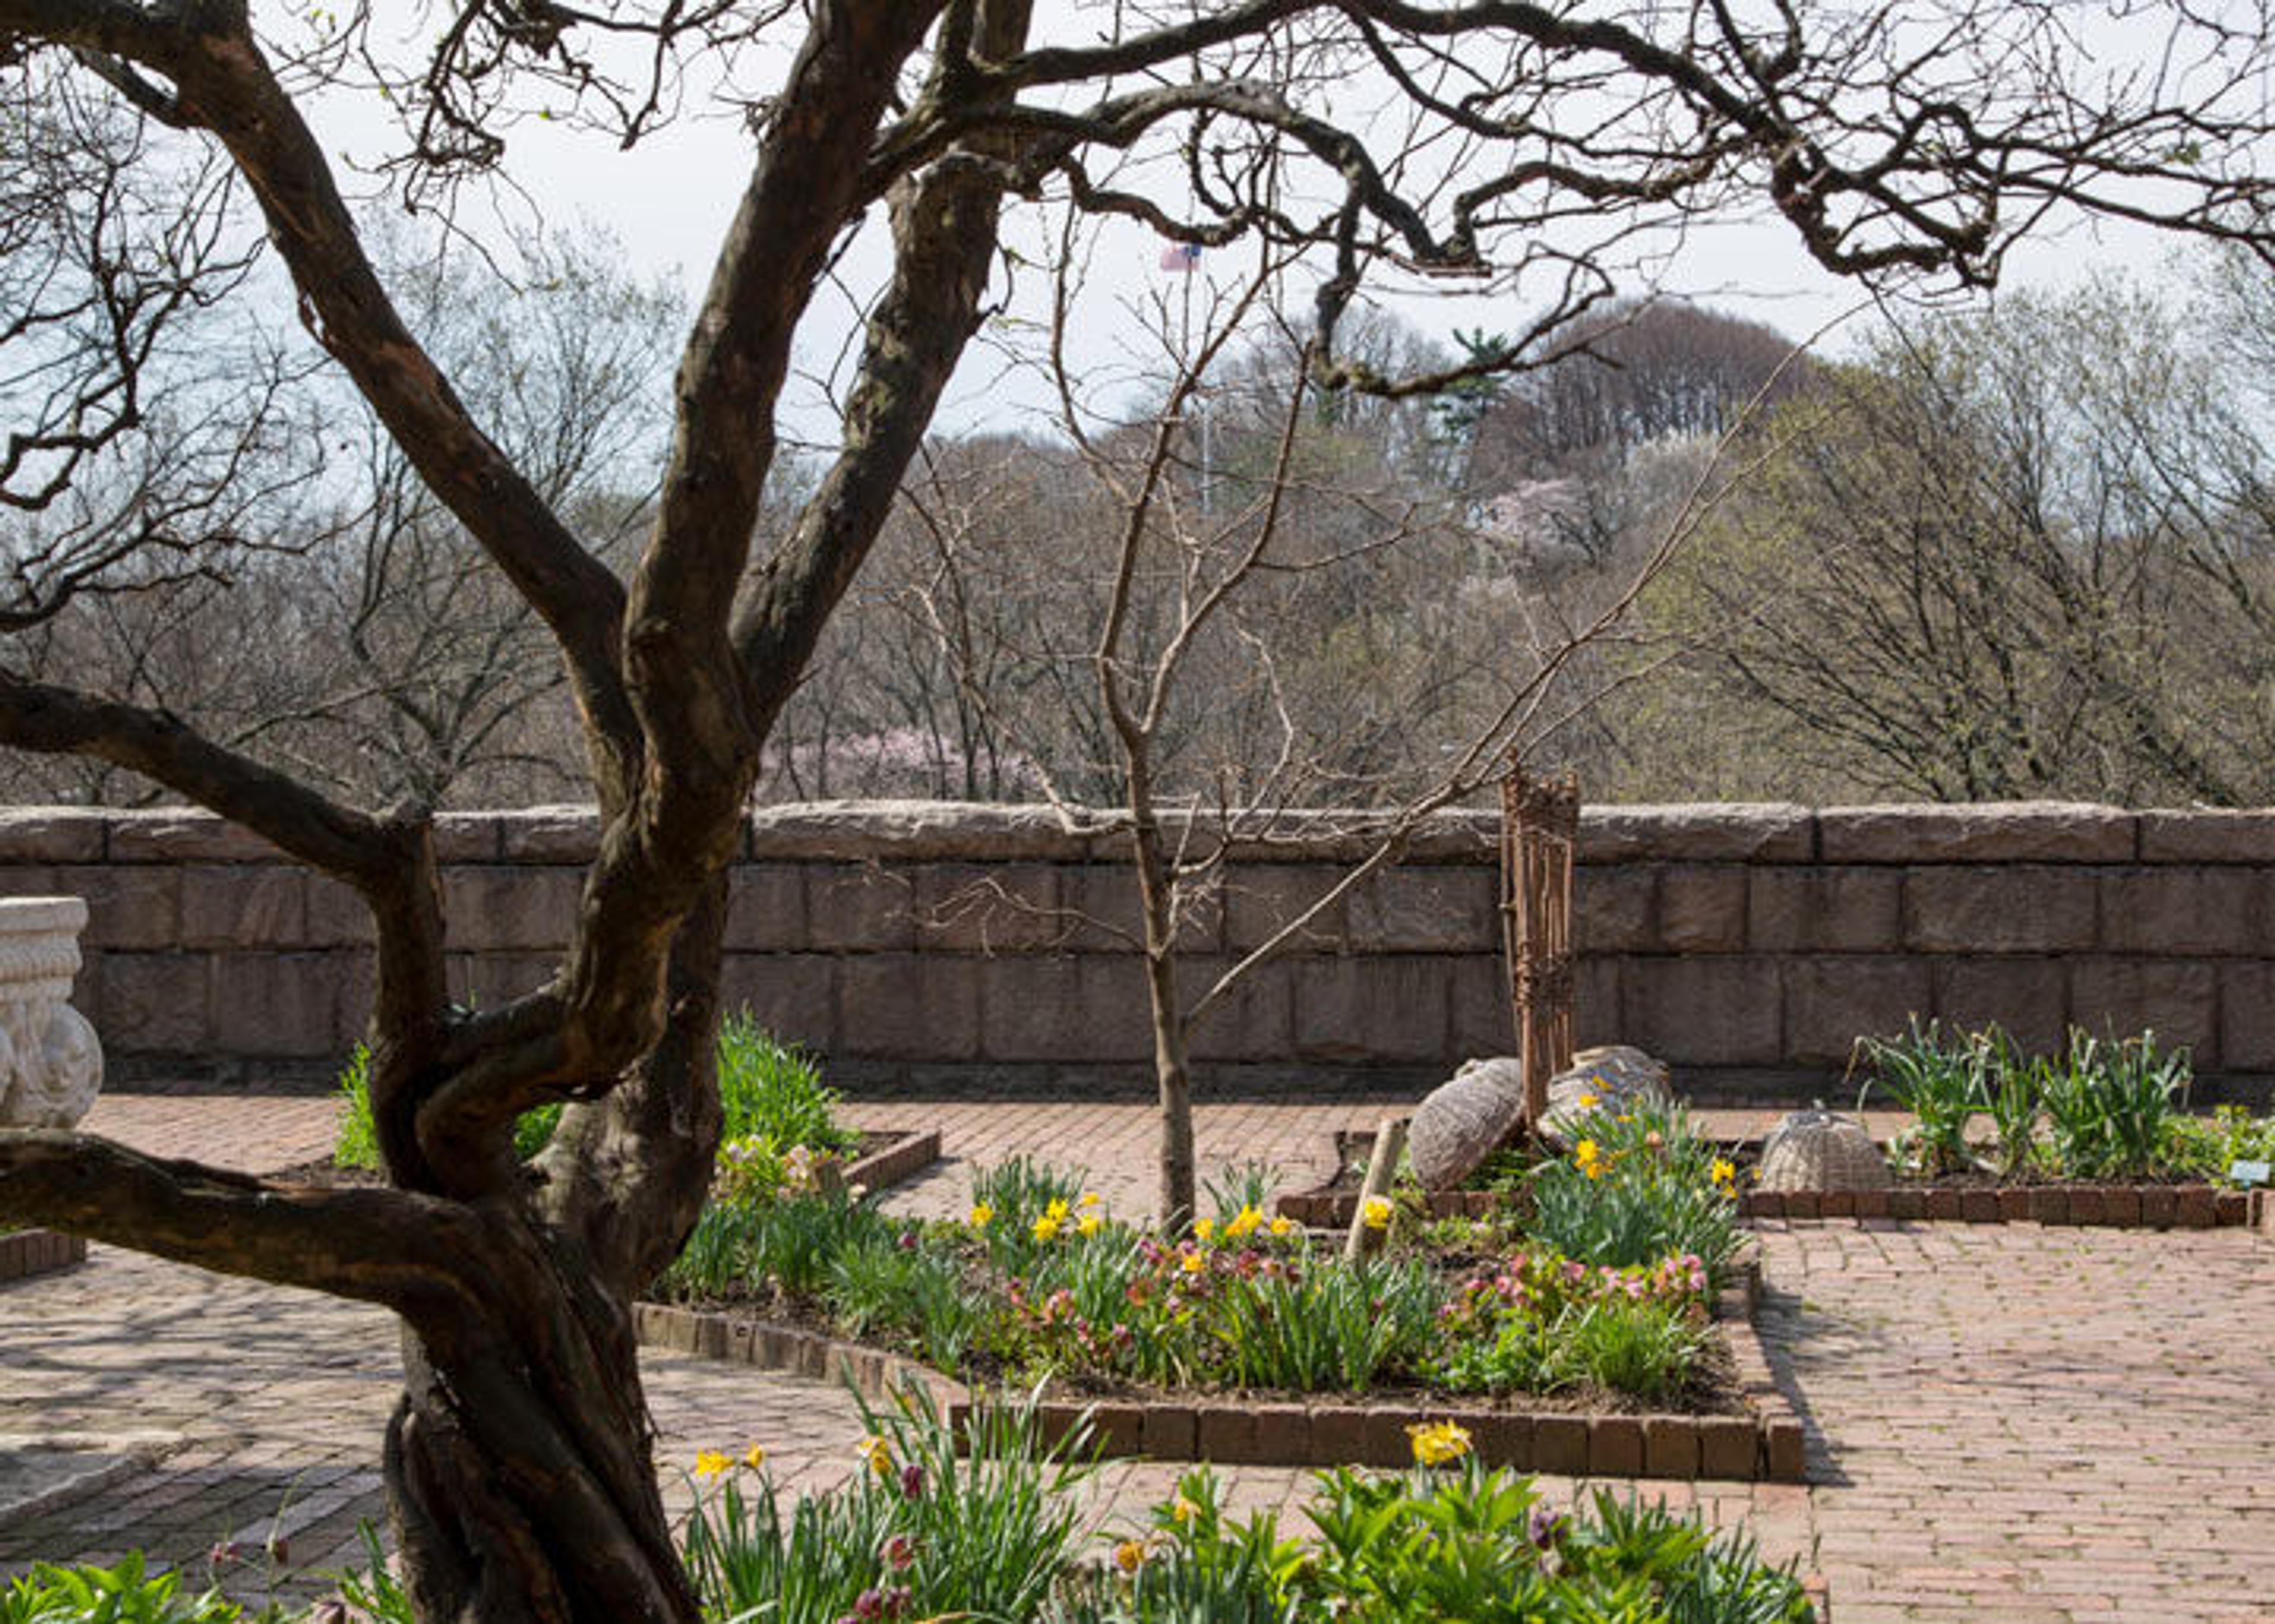 View of the Bonnefont Herb Garden at The Met Cloisters overlooking the Hudson River